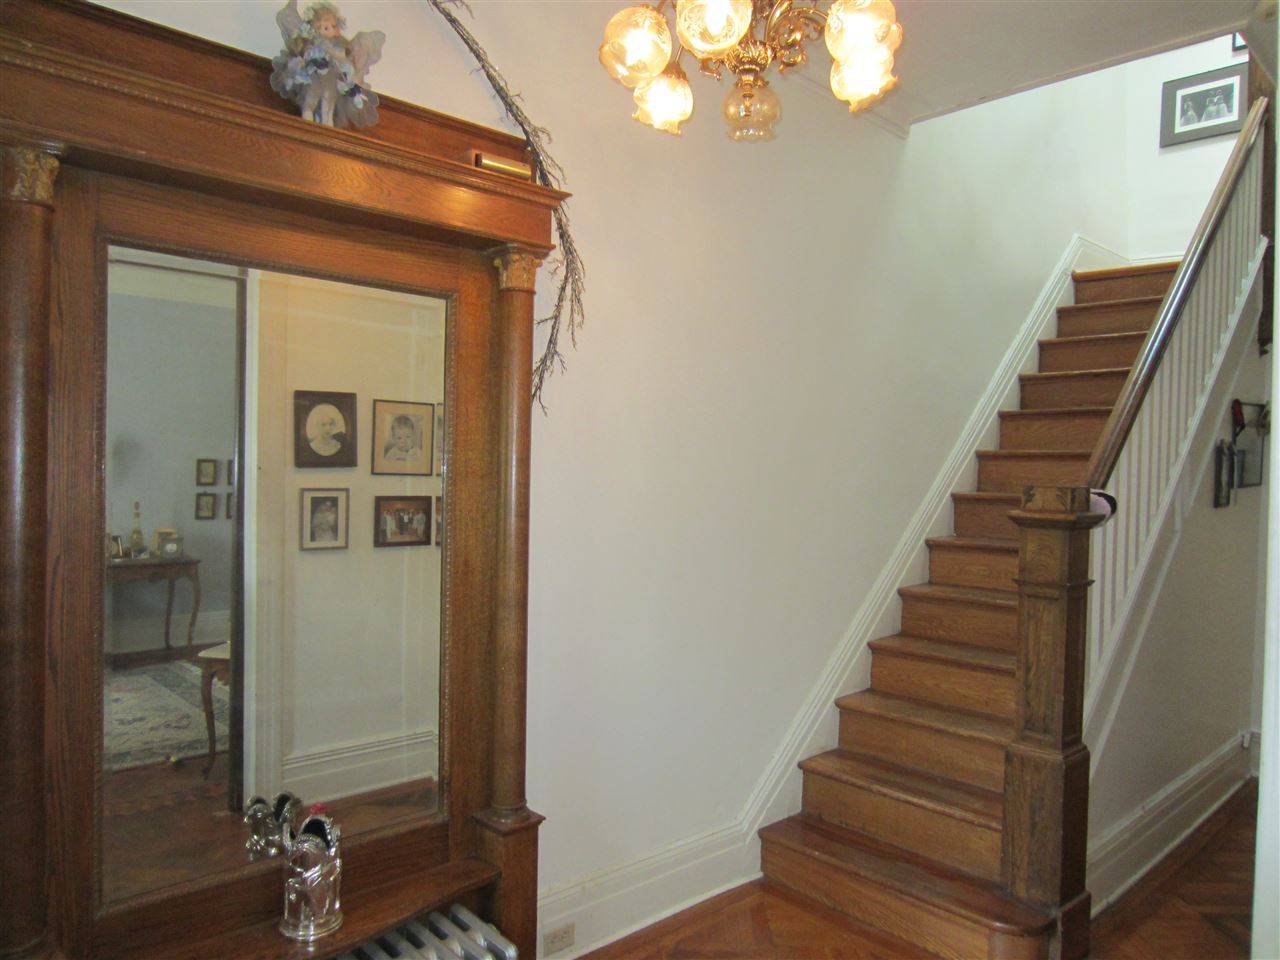 Rent this Entire House - Renovated & Restored for ideal living close to NYC